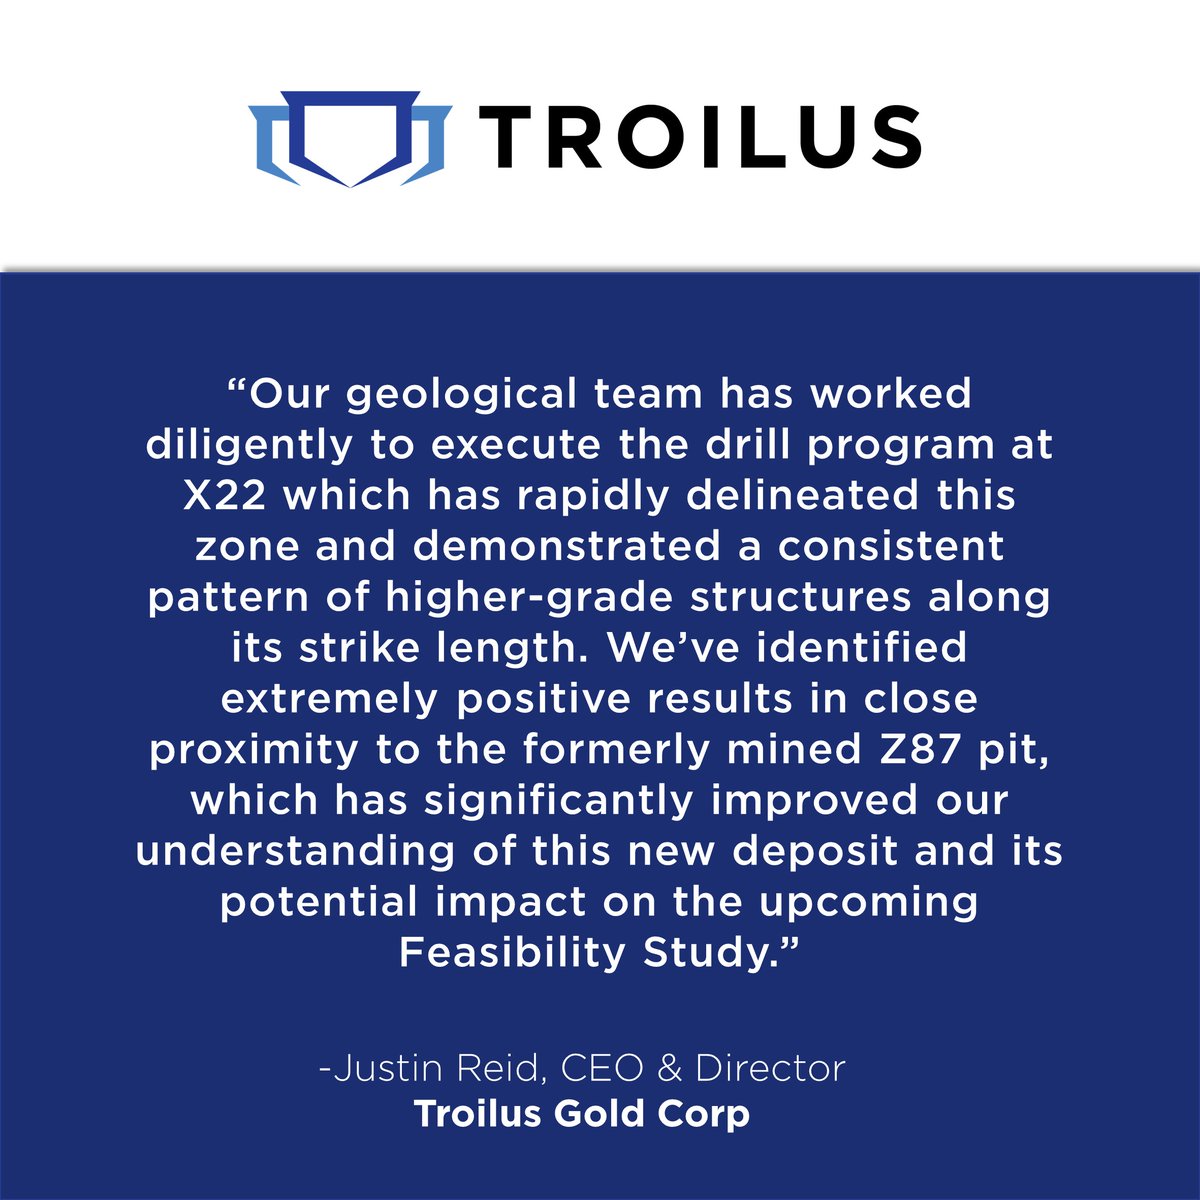 Troilus drills 1.30 g/t AuEq over 28m, 36.08 g/t AuEq over 0.5m and 12.05 g/t AuEq over 2m; confirms mineral continuity in the northeast region of Zone X22

Read the news here: troilusgold.net/PR

$TLG $CHXMF $CM5R

#gold #copper #exploration #goldmining #preciousmetals